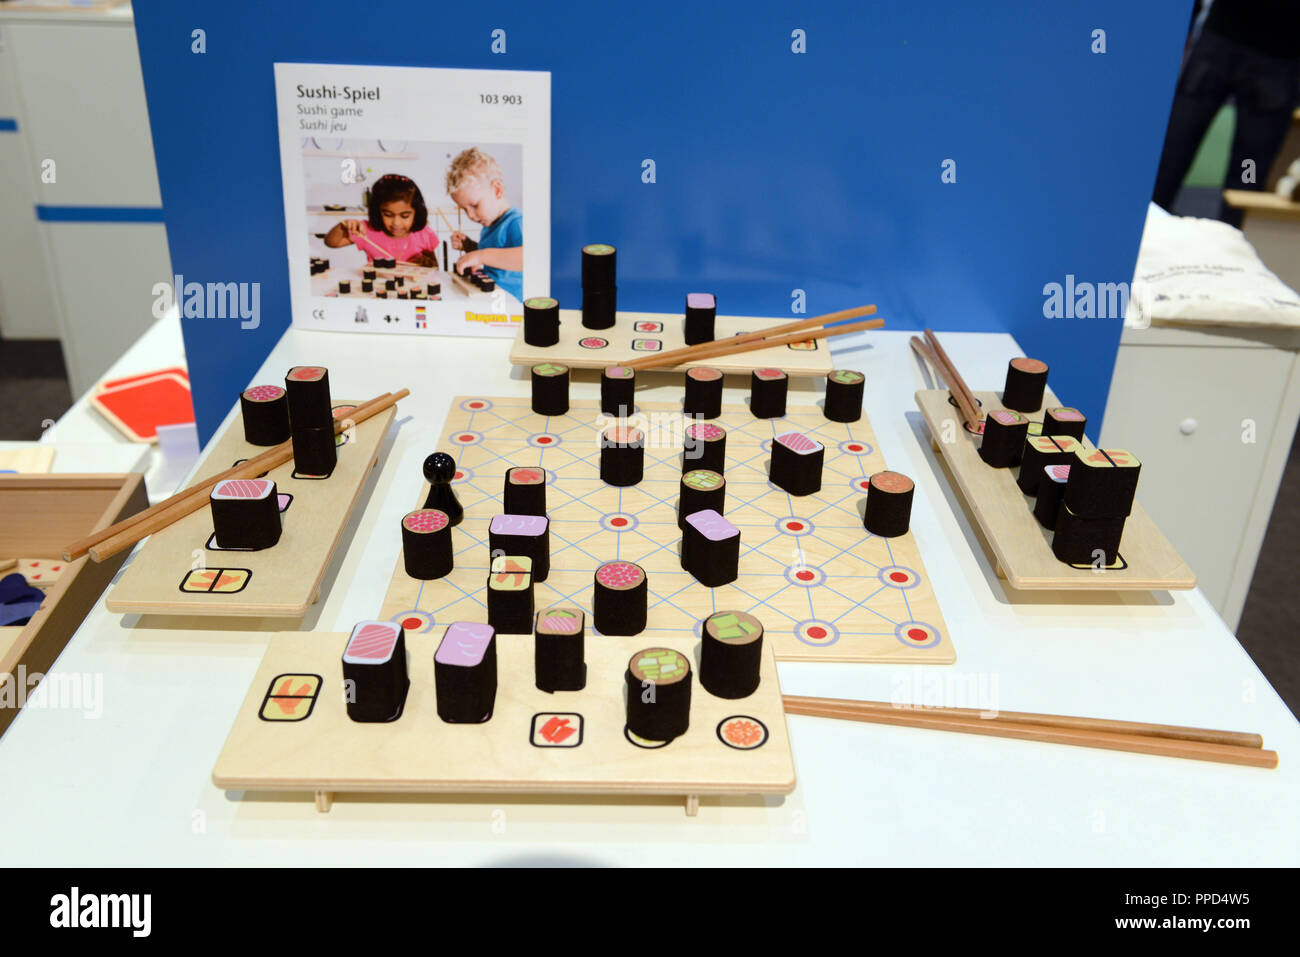 Sushi toy at the Dusyma stand at the Toy Fair in Nuremberg. Stock Photo